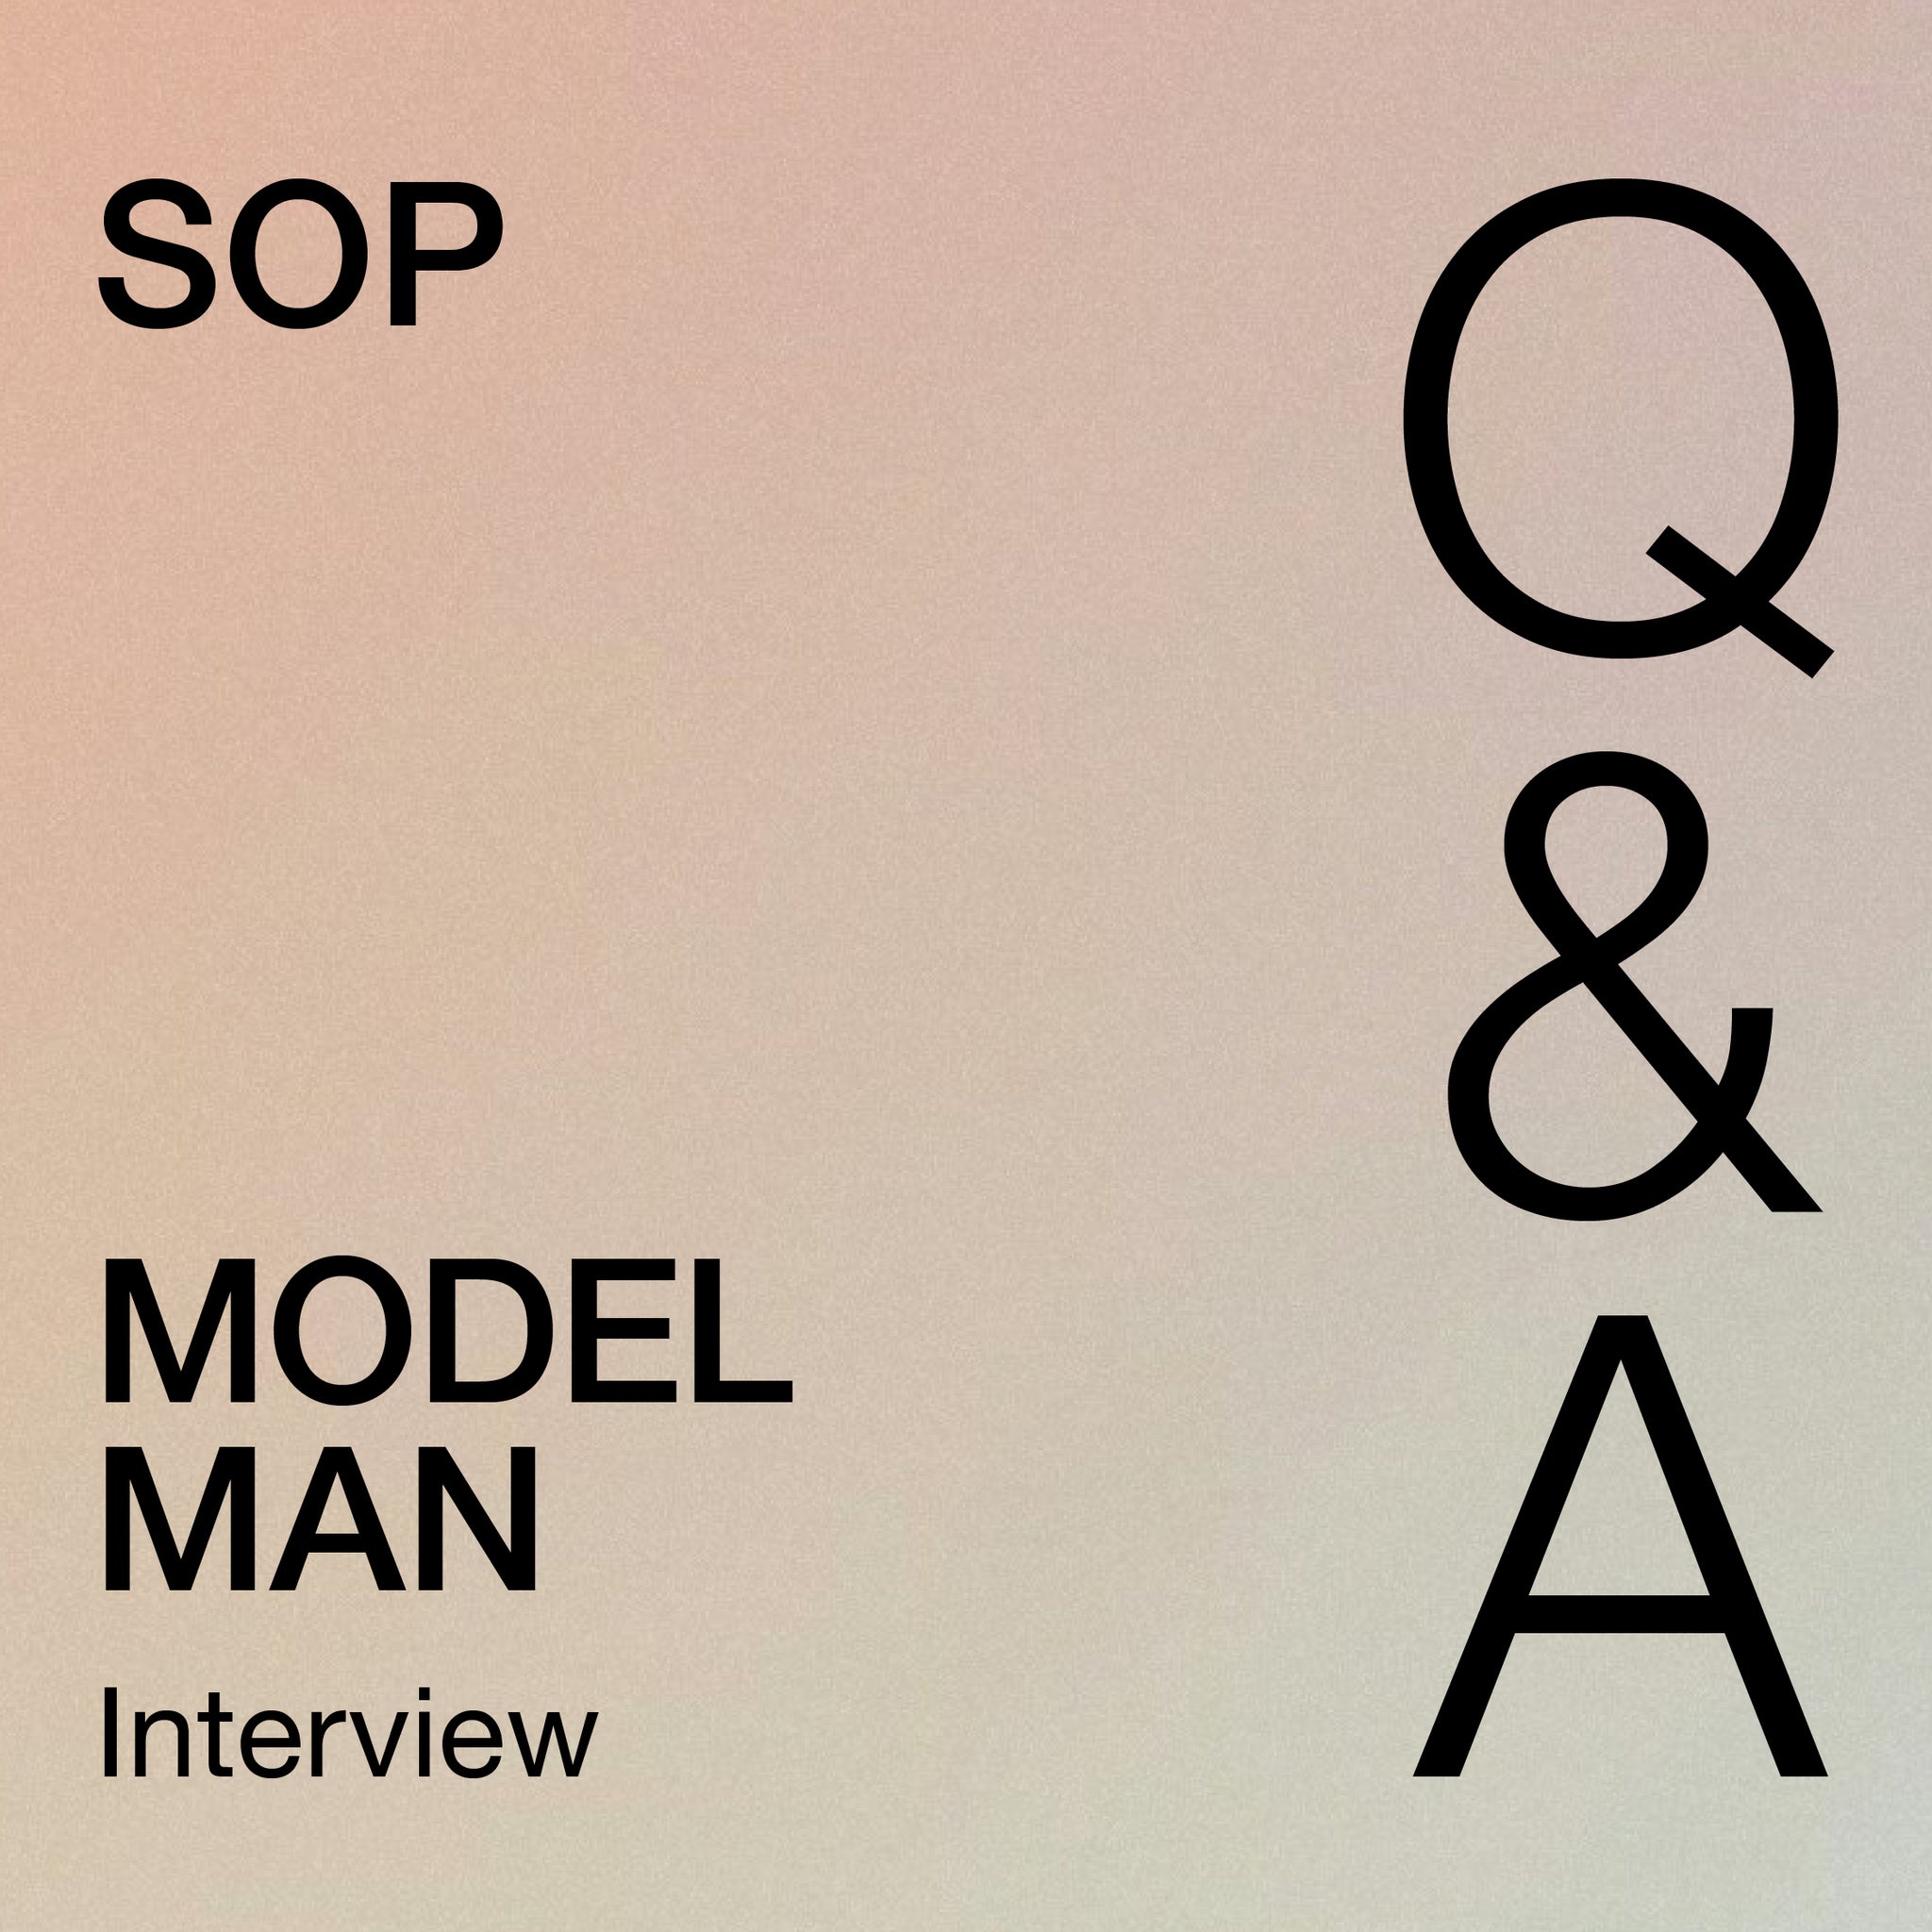 Q&A with Model Man.